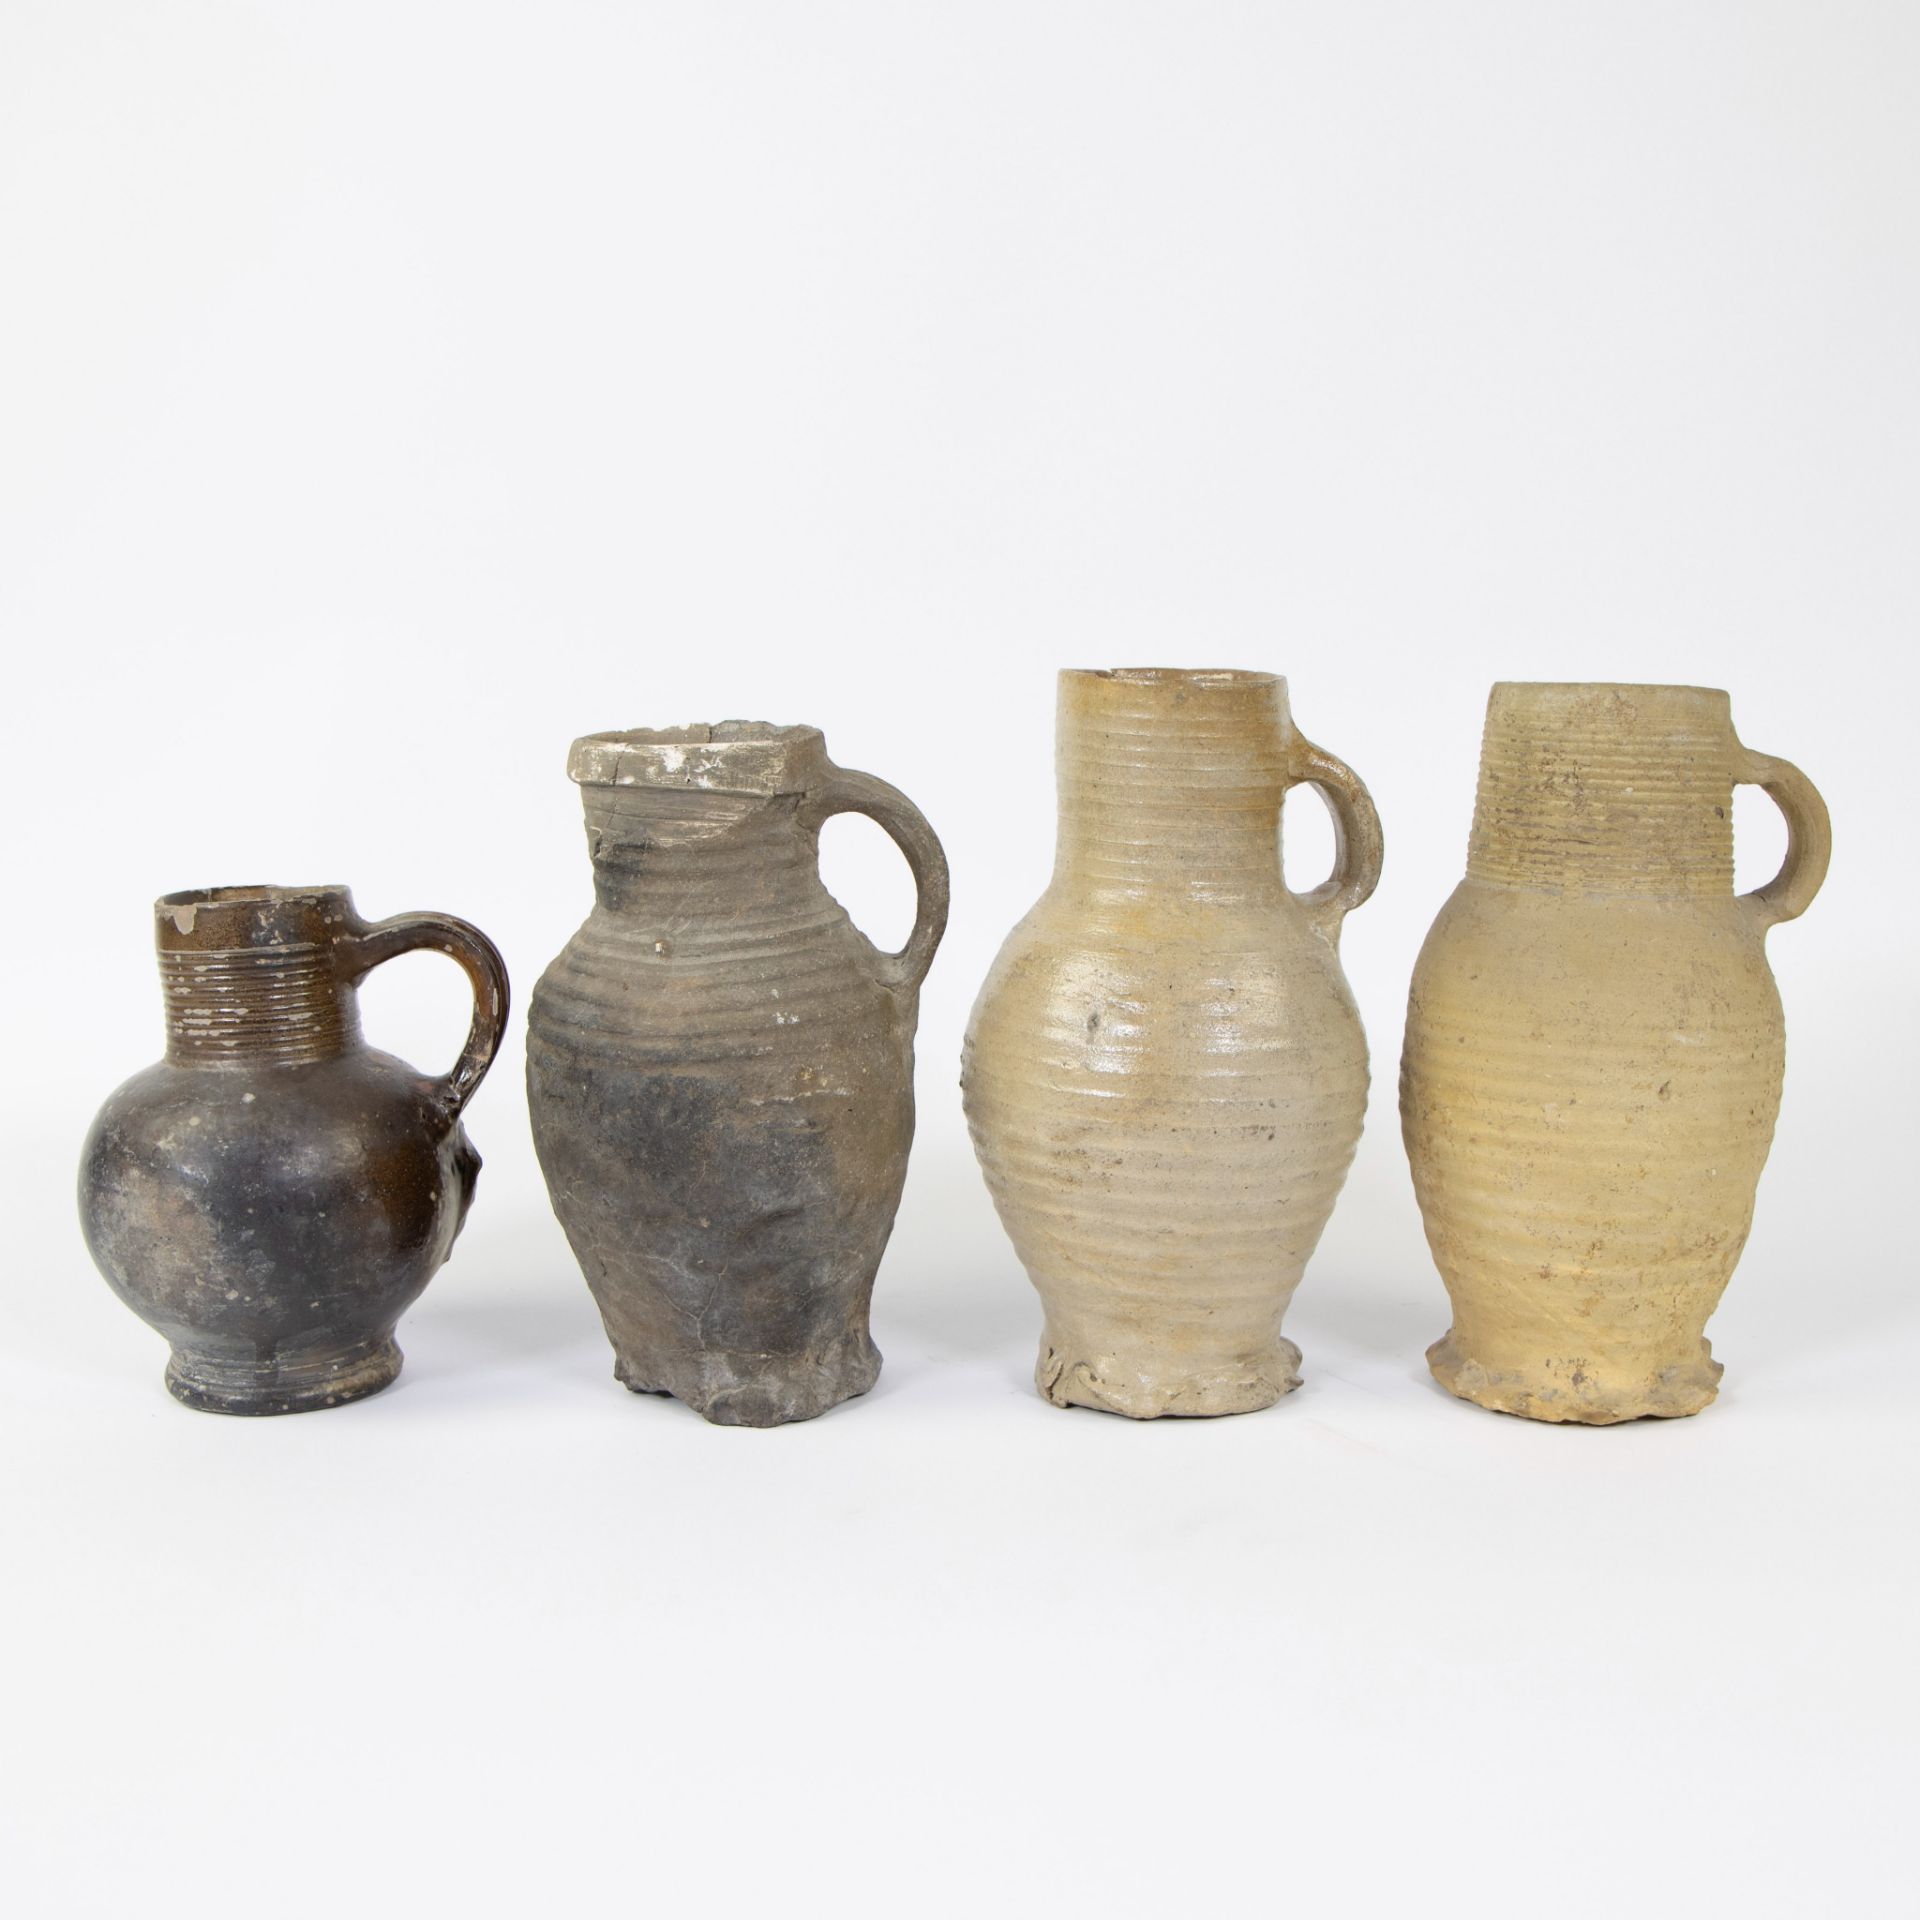 Collection of archaeological stoneware 13th to 15th century, oa jug Siegburg 13th and 14th century